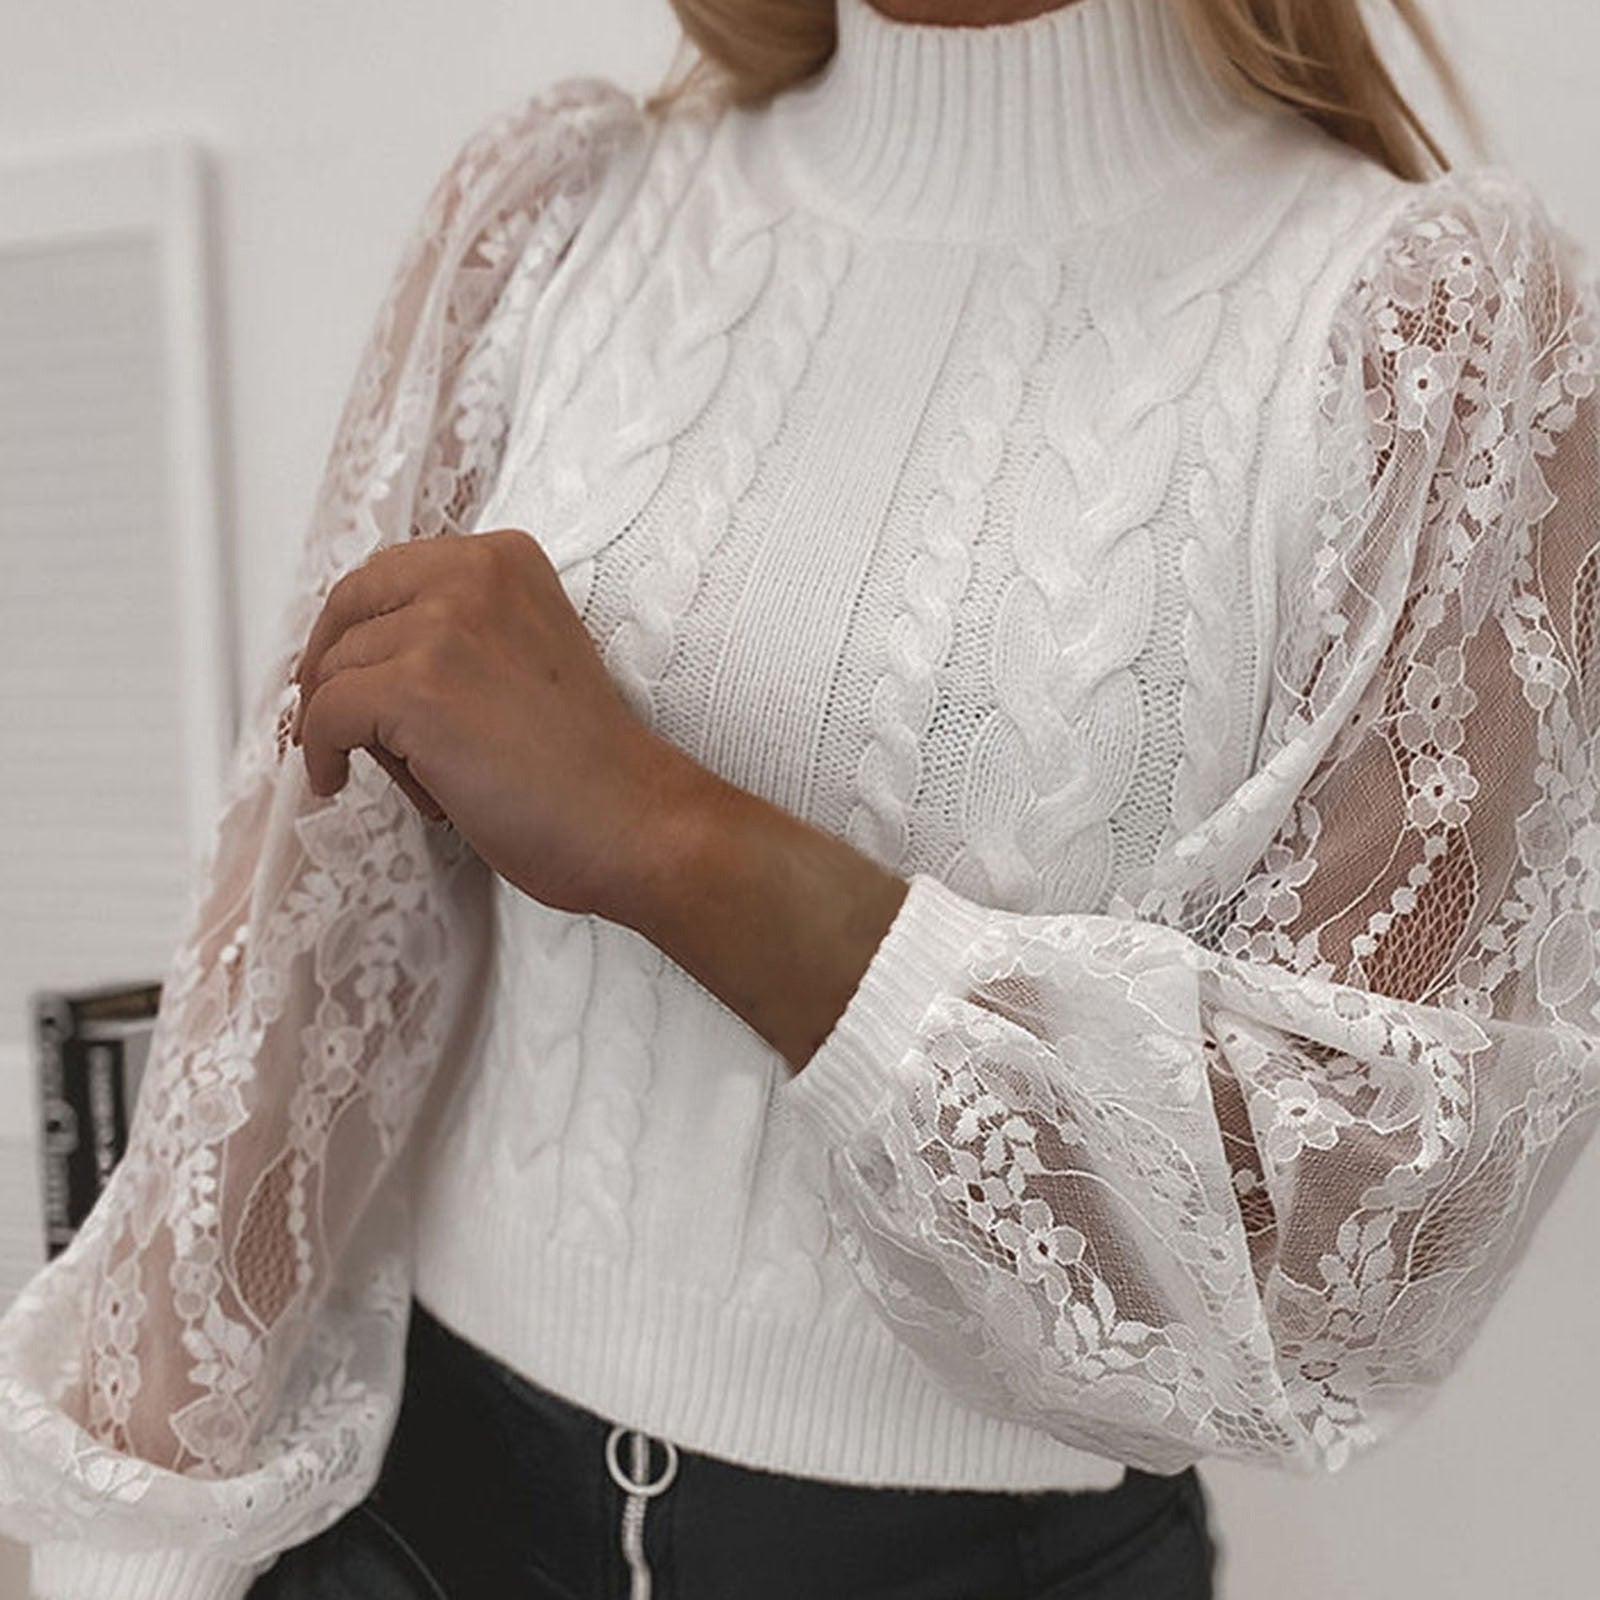 Billlnai White Lace Knitted Sweaters Women's Turtleneck Hollow Out Lantern Sleeve Sweater Ladies Elegant Party Tops Camisa De